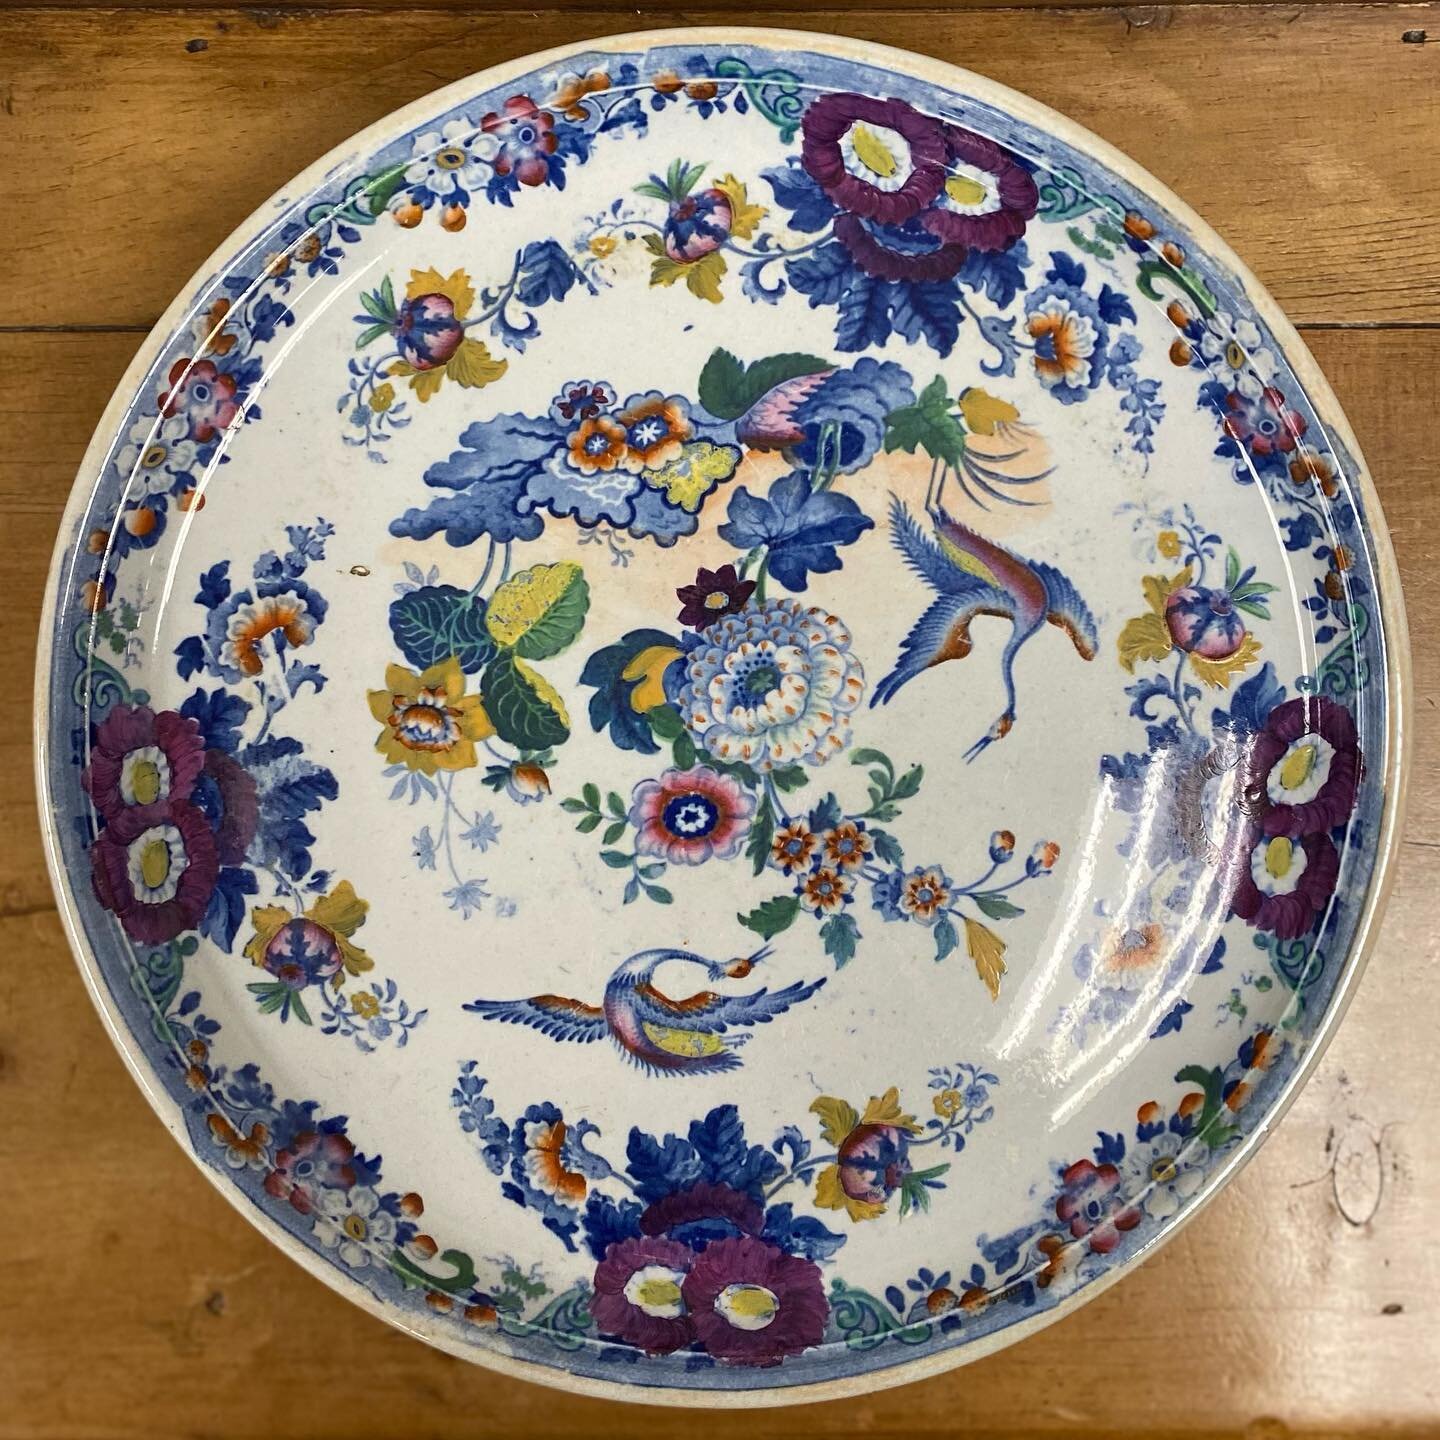 I&rsquo;m ONE OF A KIND&hellip;a LIMITED EDITION!  Come see this beautiful Antique Cheese Tray from our most recent shipment! #antiques #antiquesmalls #antiquecheesetray #antiquecheeseplate #antiquedealersofinstagram #oneofakind